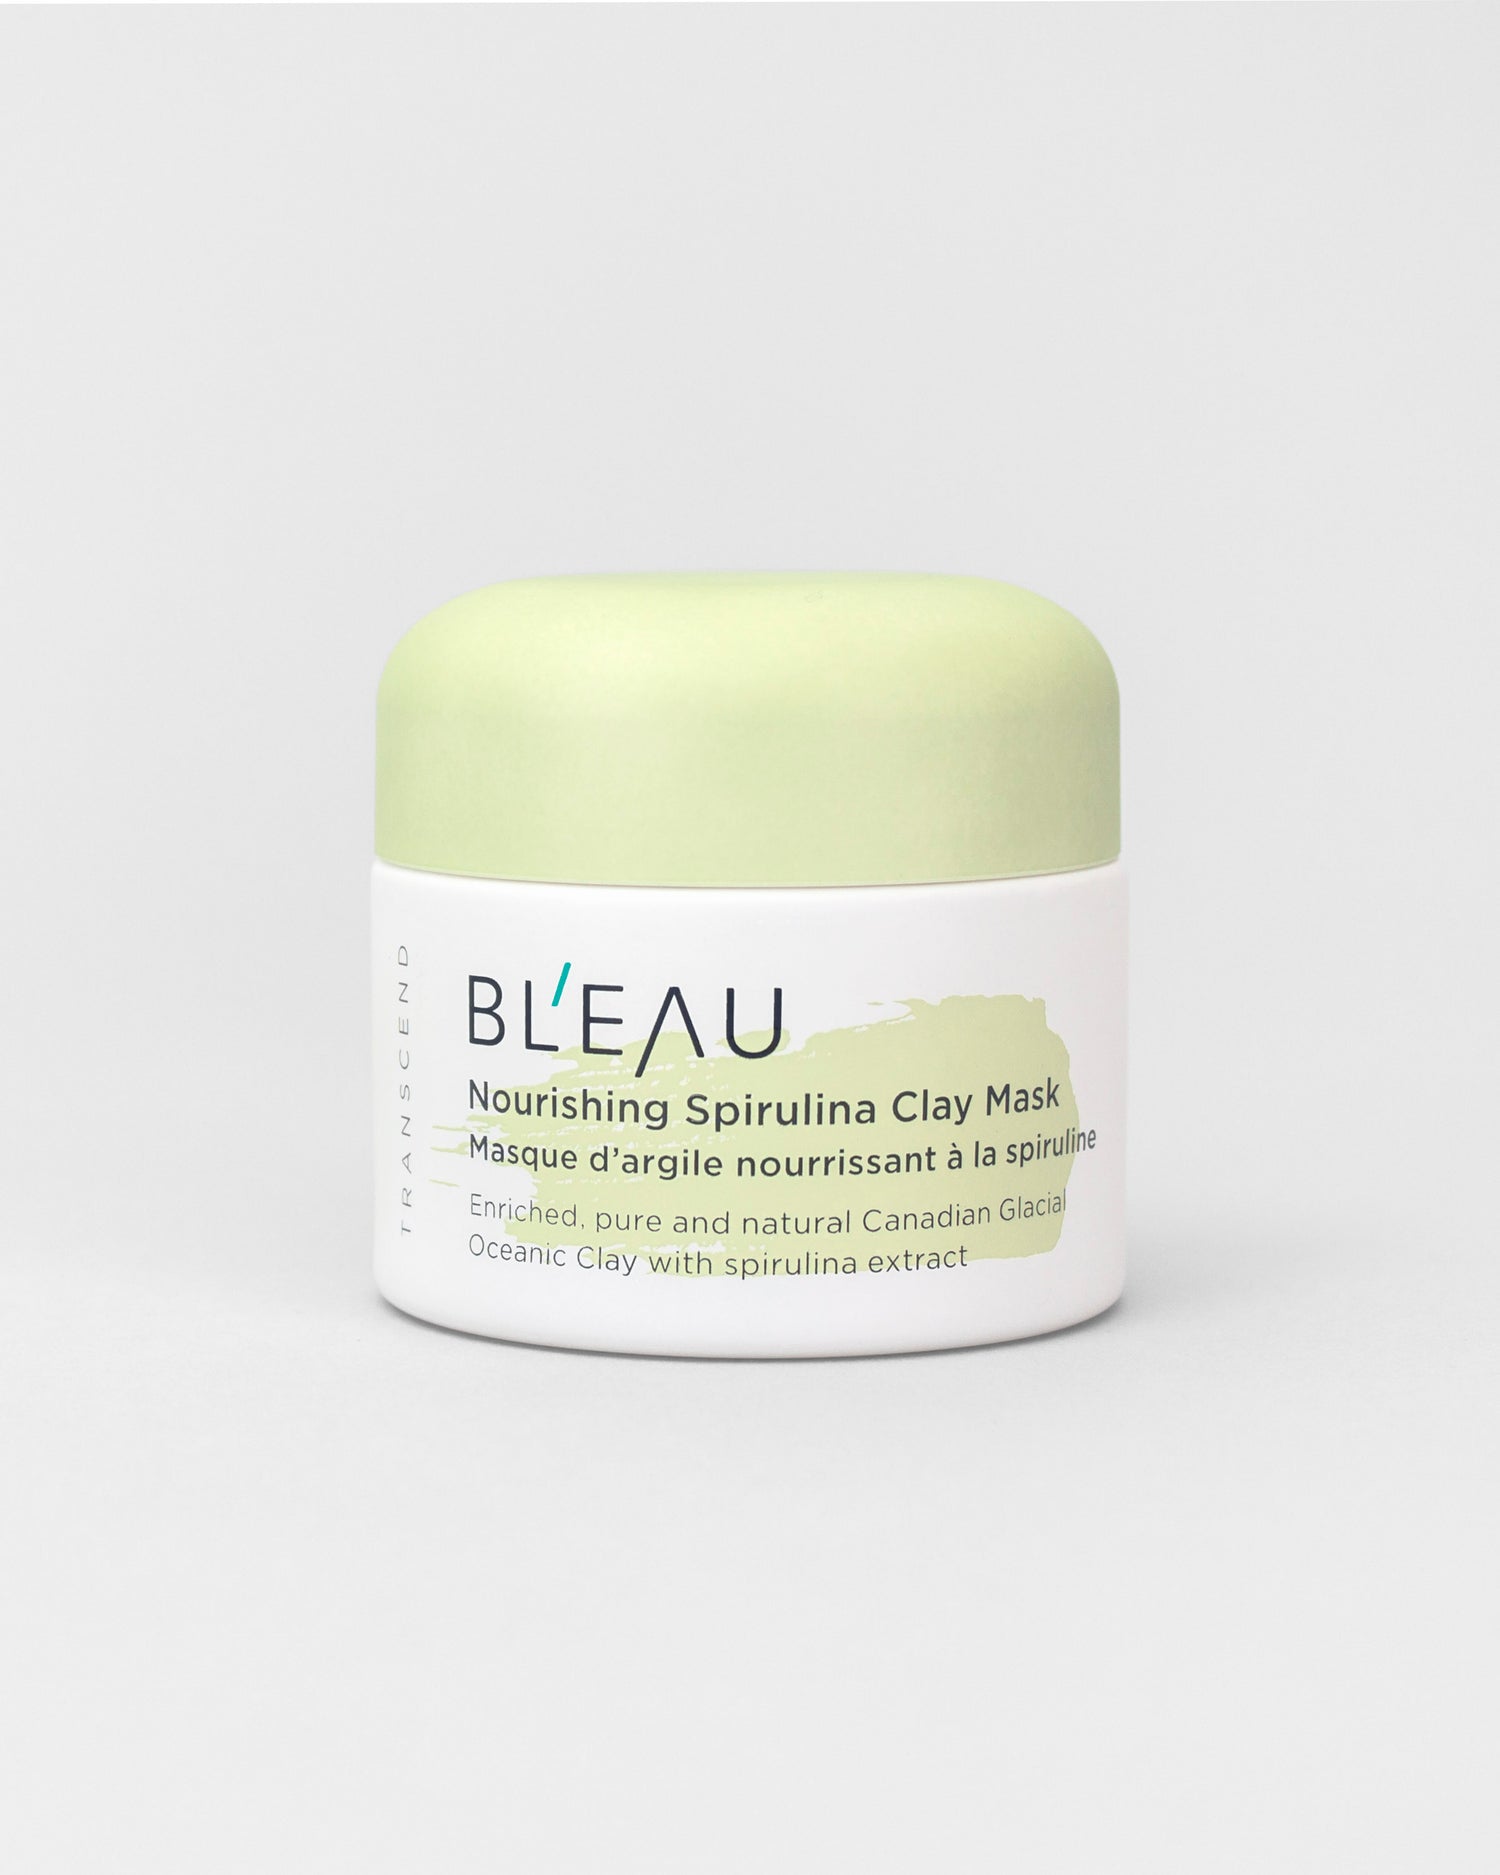 Glacial Oceanic Clay Glacial Clay face mask Transcend Collection Nourishing Spirulina Clay Mask